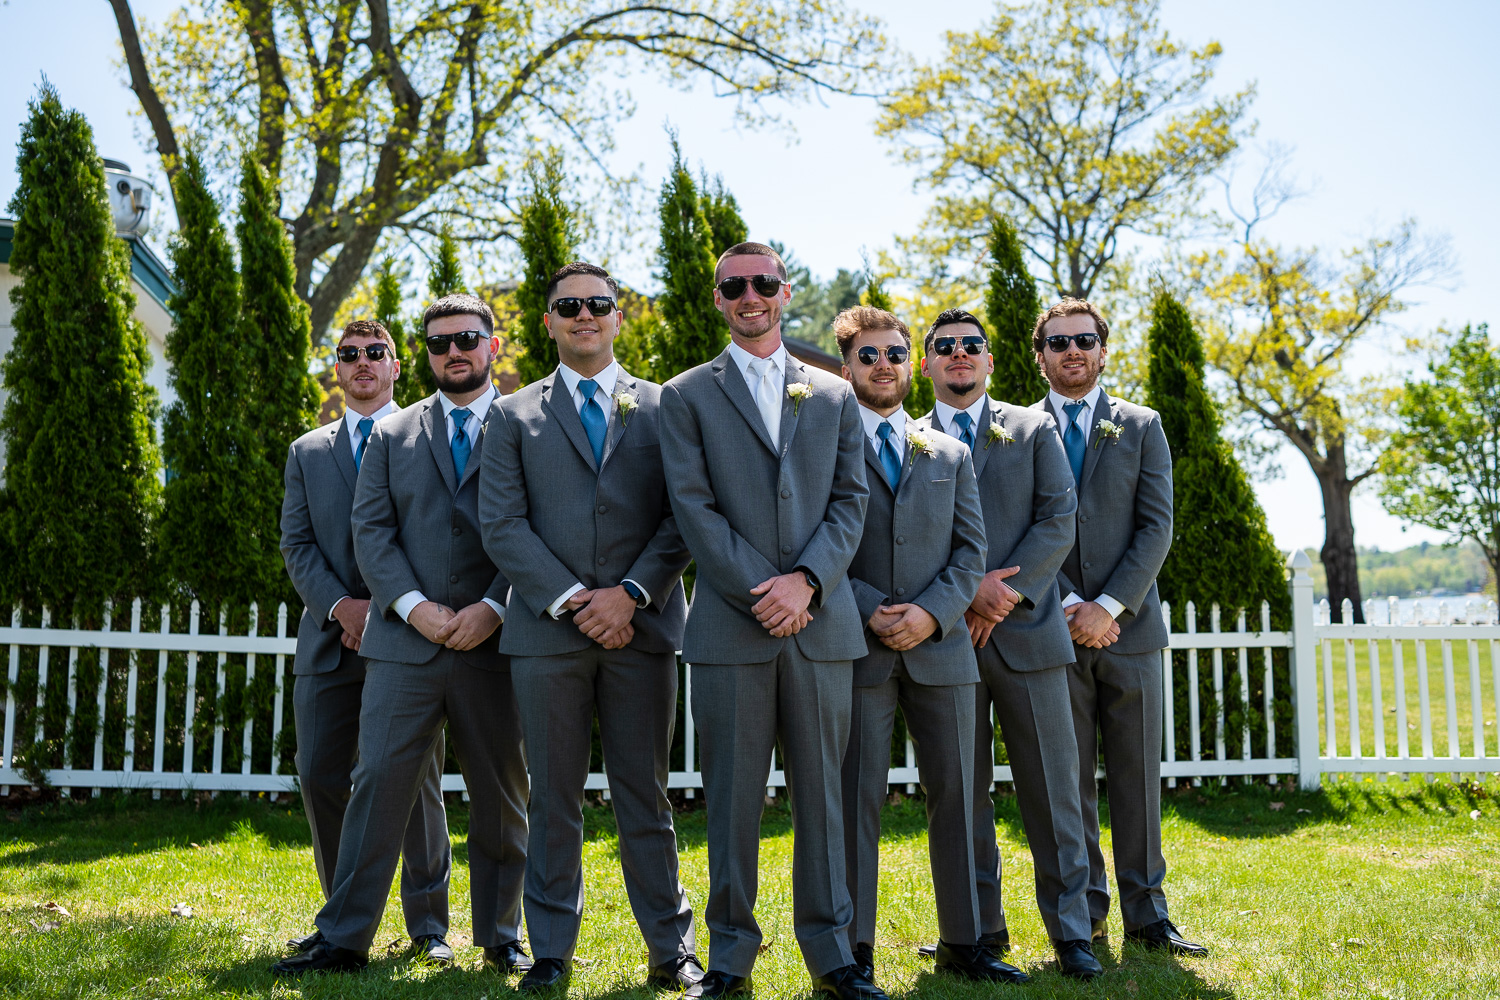 Groom and groomsmen getting ready for the lakeside wedding